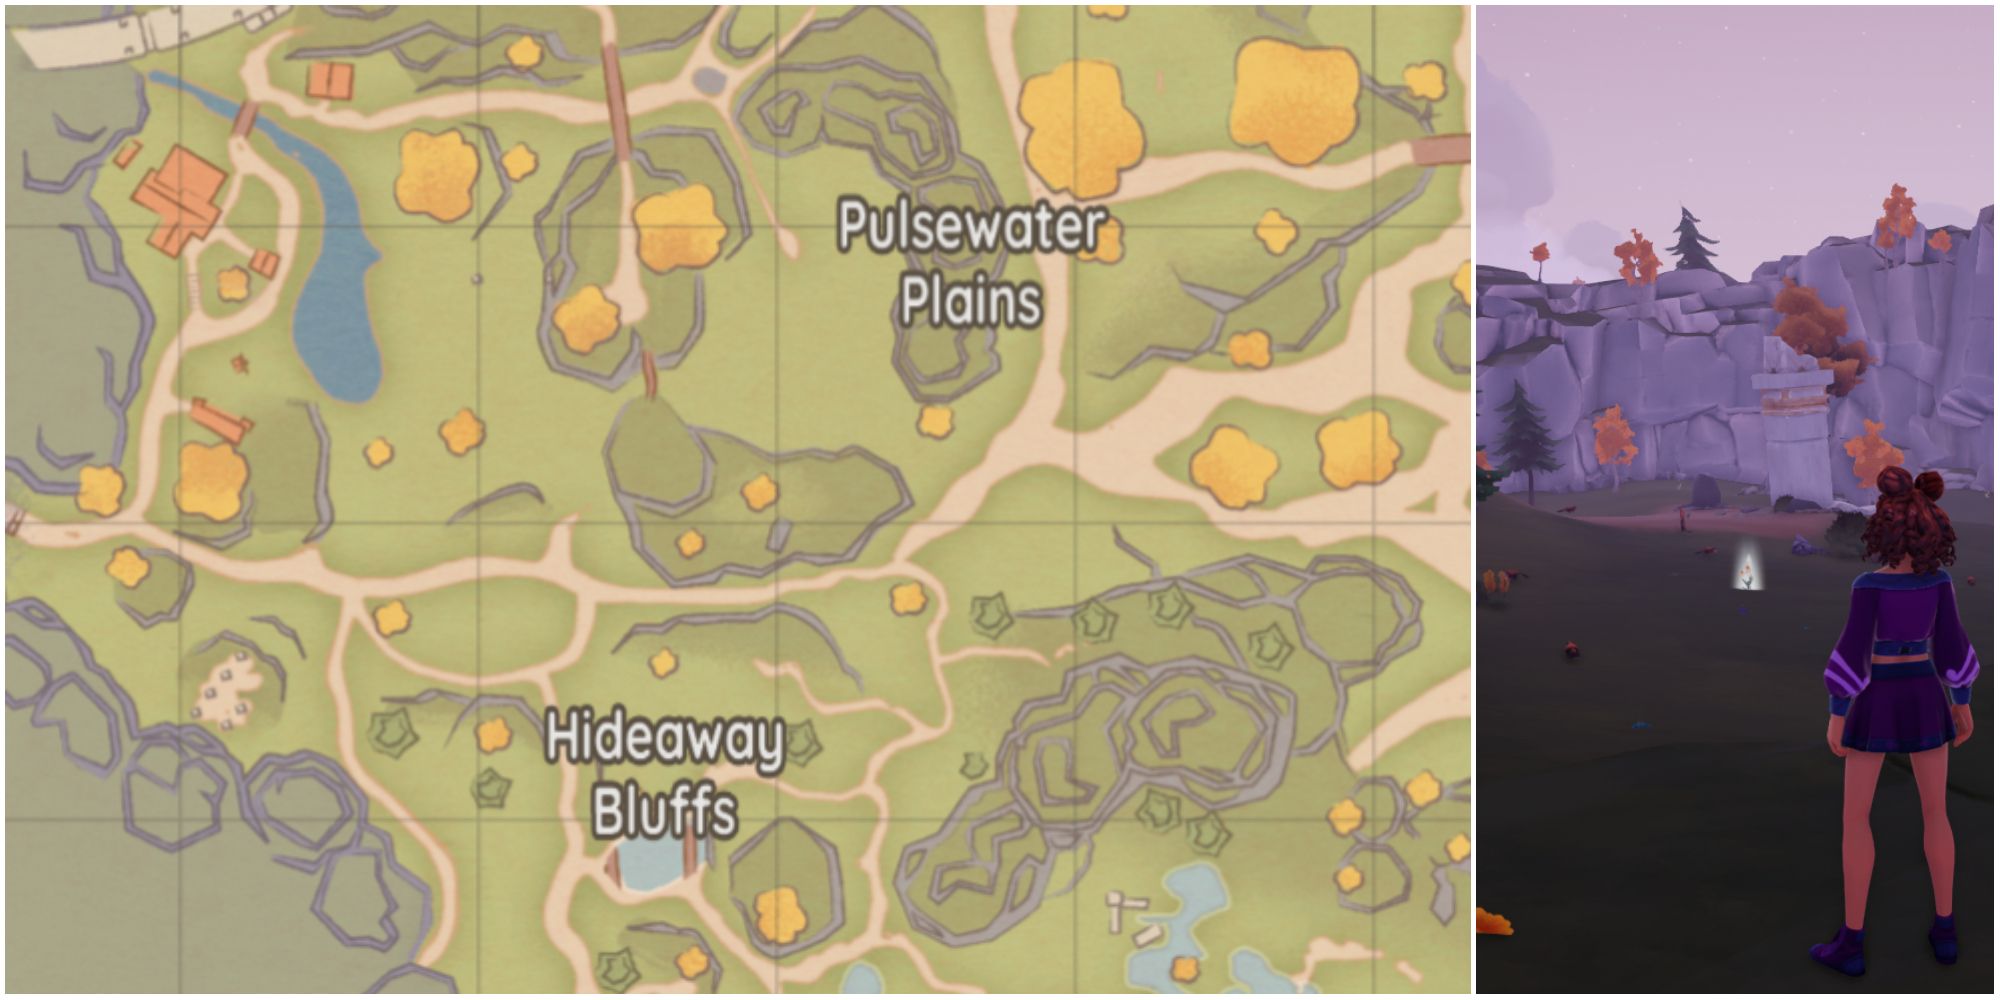 A map showing Pulsewater Plains and Hideaway Bluffs, the best area in Bahari Bay to catch bugs